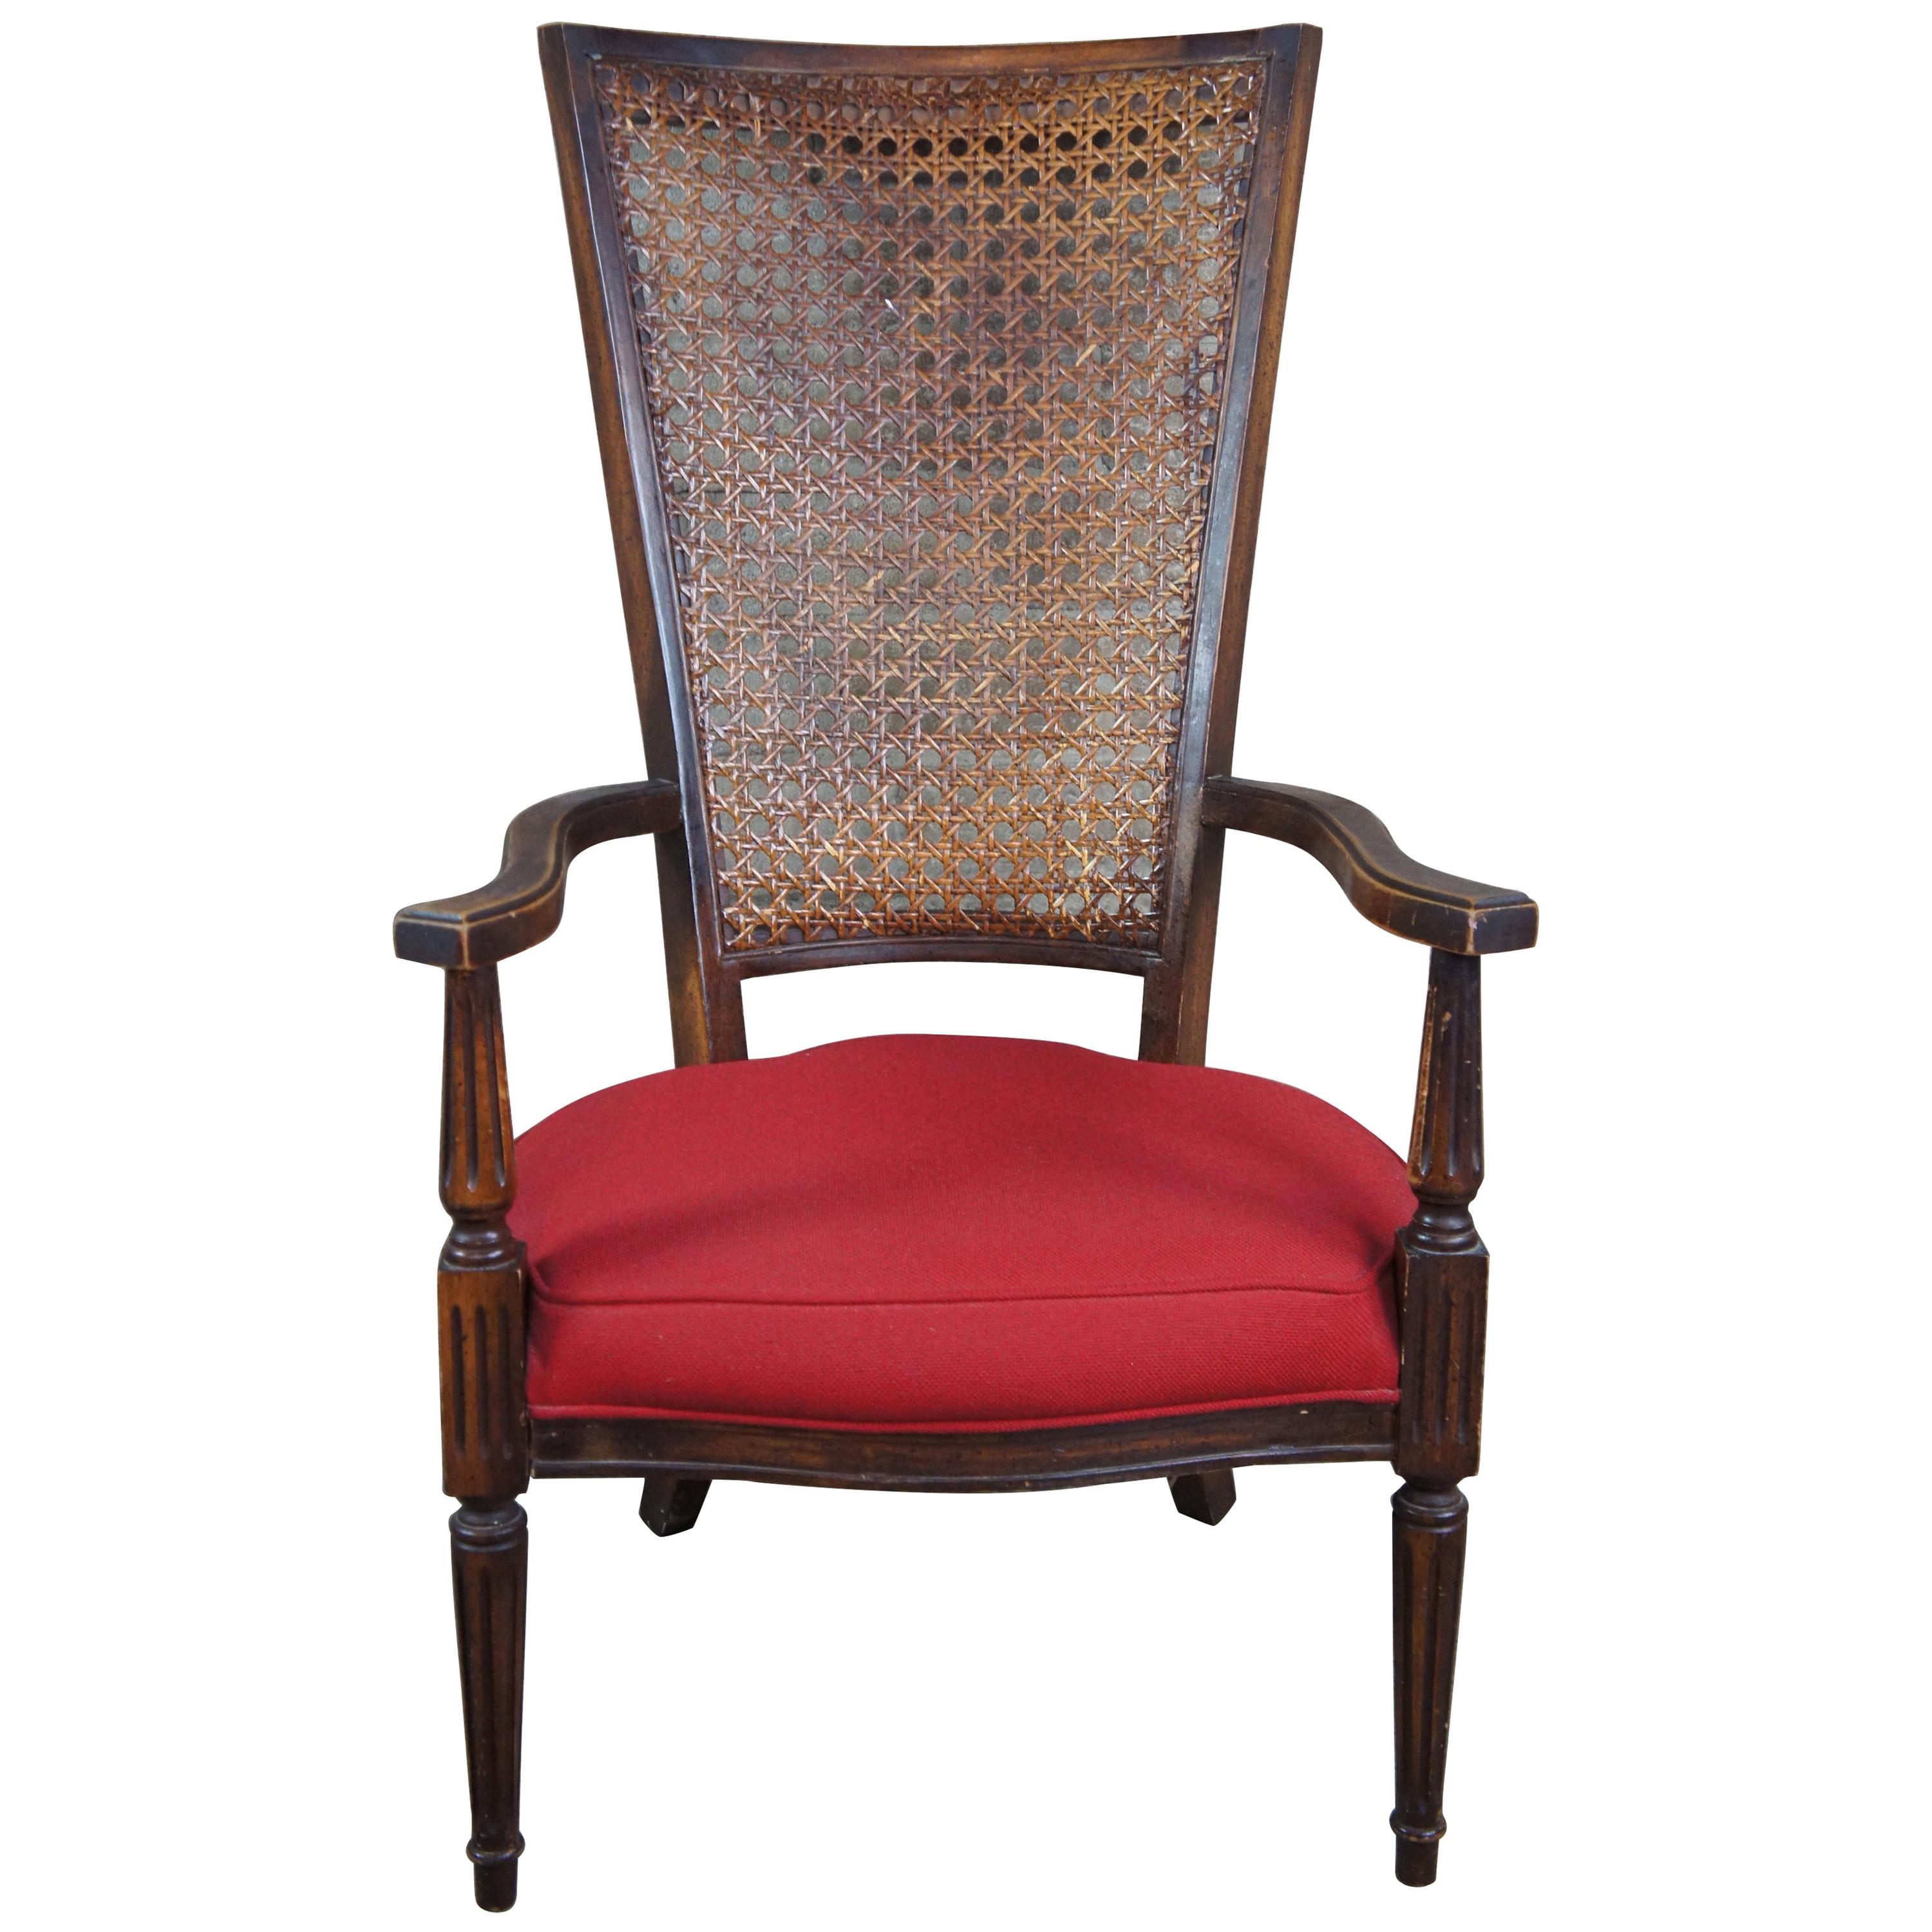 20th Century French Armchair Distressed Walnut Caned Back Red Seat